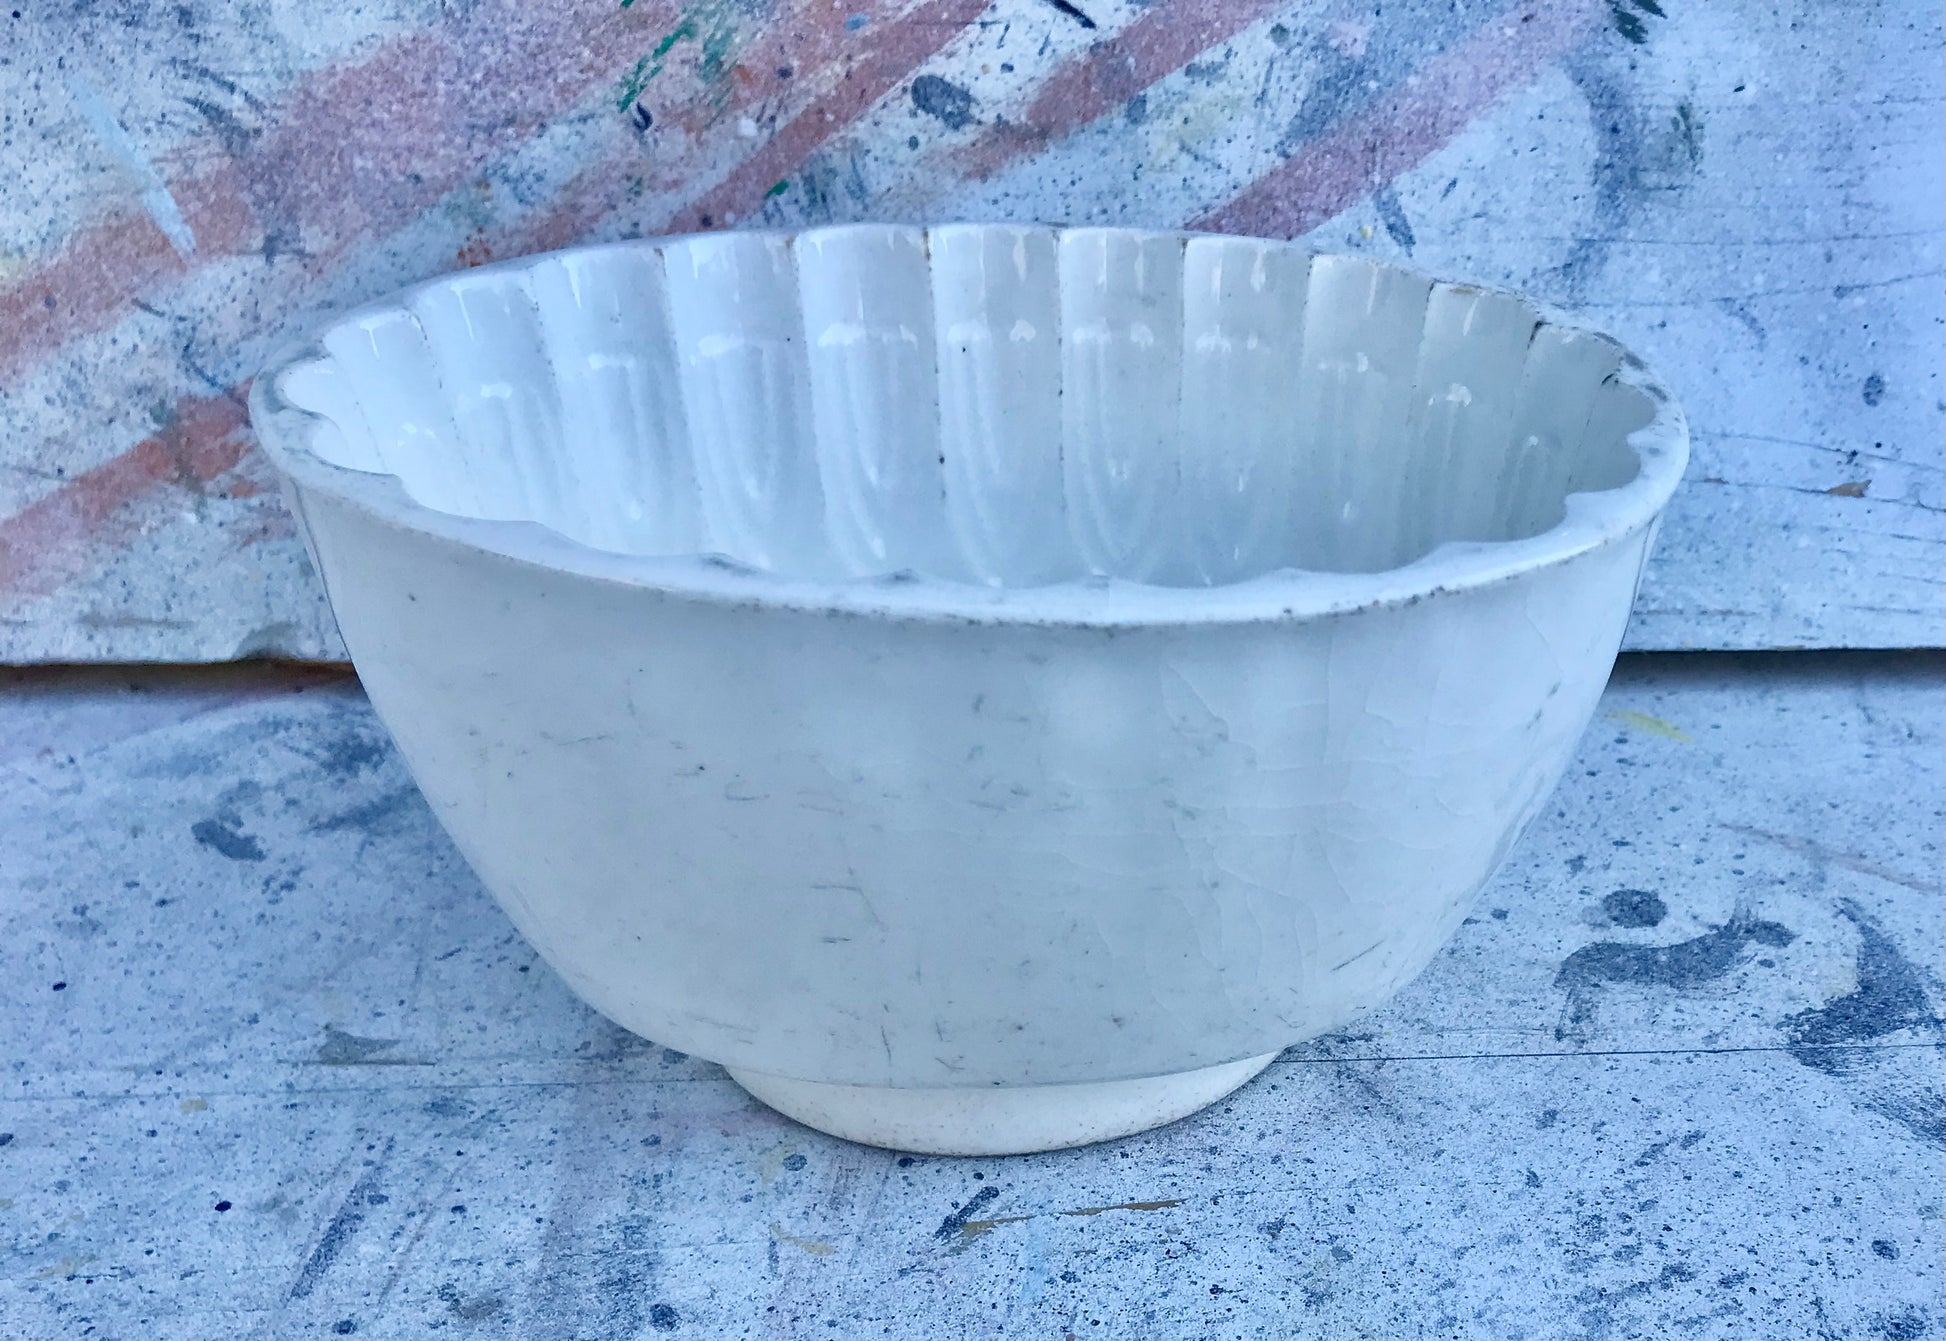 Vintage Ironstone ceramic jelly mould with shell design 15cm w x 12cm l x8.5cm high